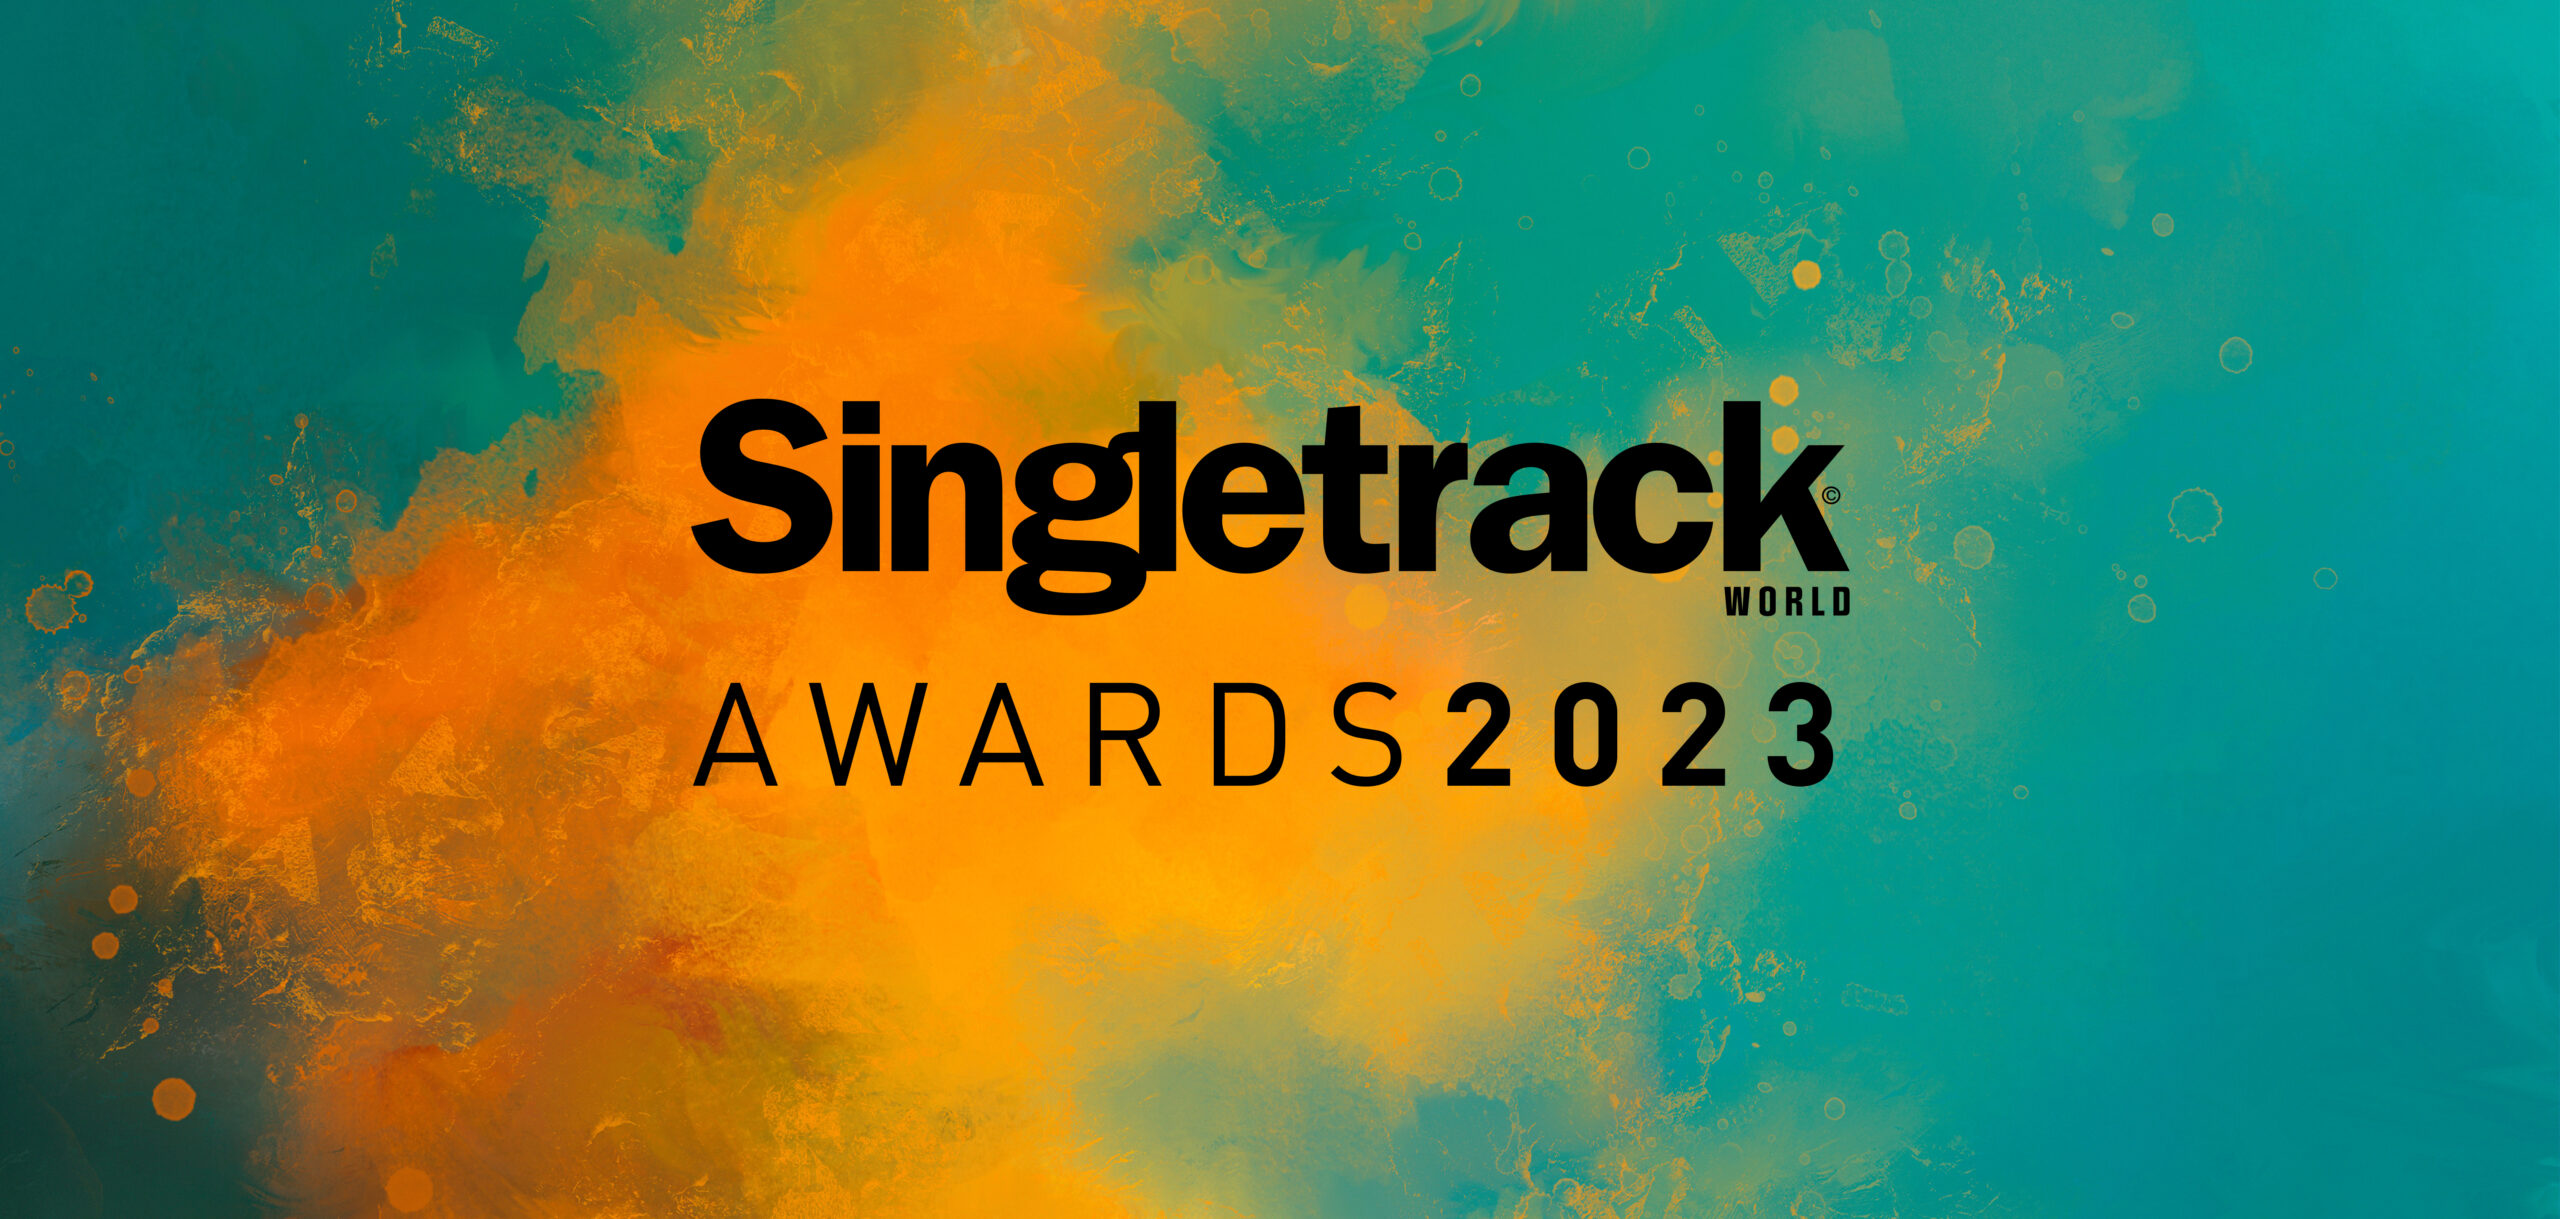 Singletrack awards Cotic nominated